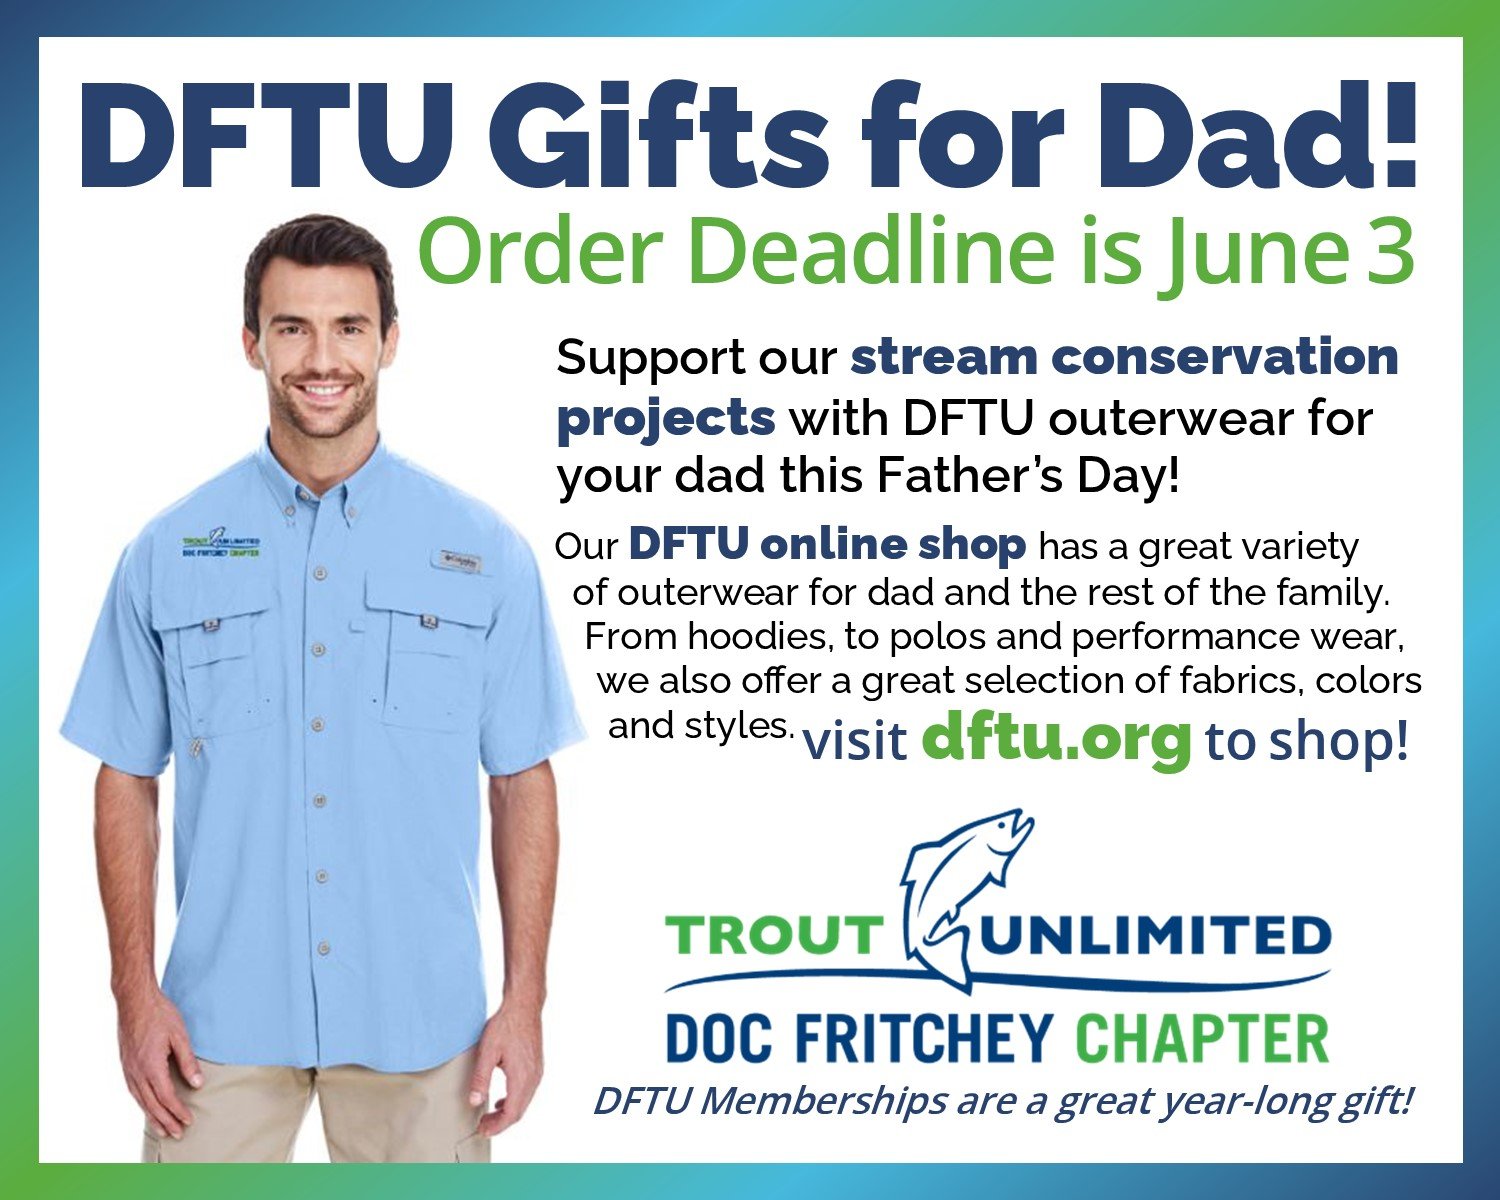 DFTU Gifts for Dad! Order Deadline is June 3. Support our stream conservation projects with DFTU outerwear for your dad this Father's Day!